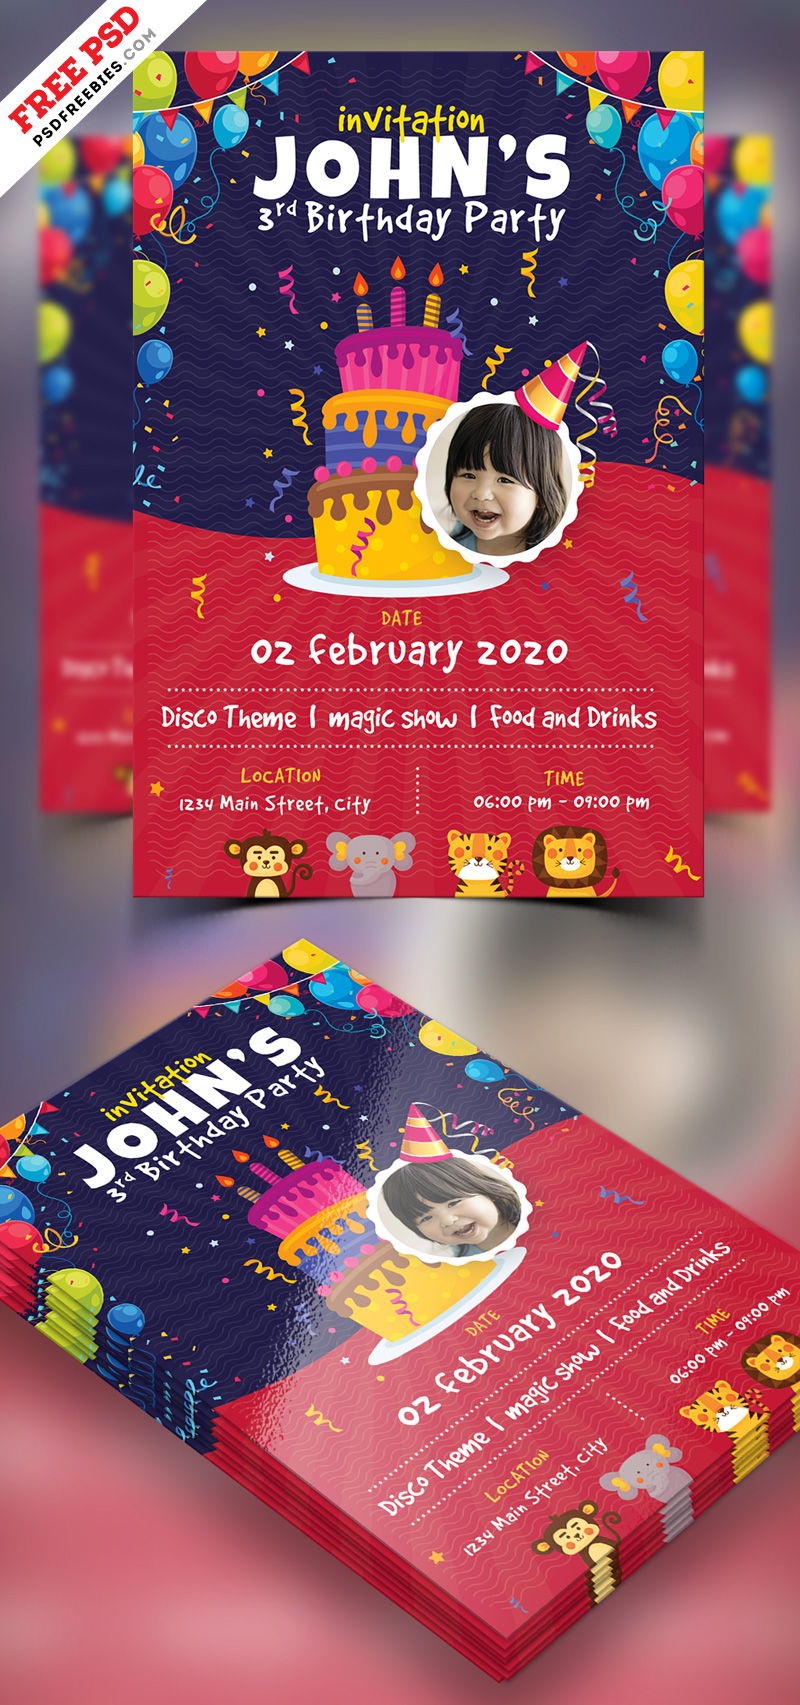 Kids-Birthday-Party-Invitation-Flyer-PSD-Free-Download2